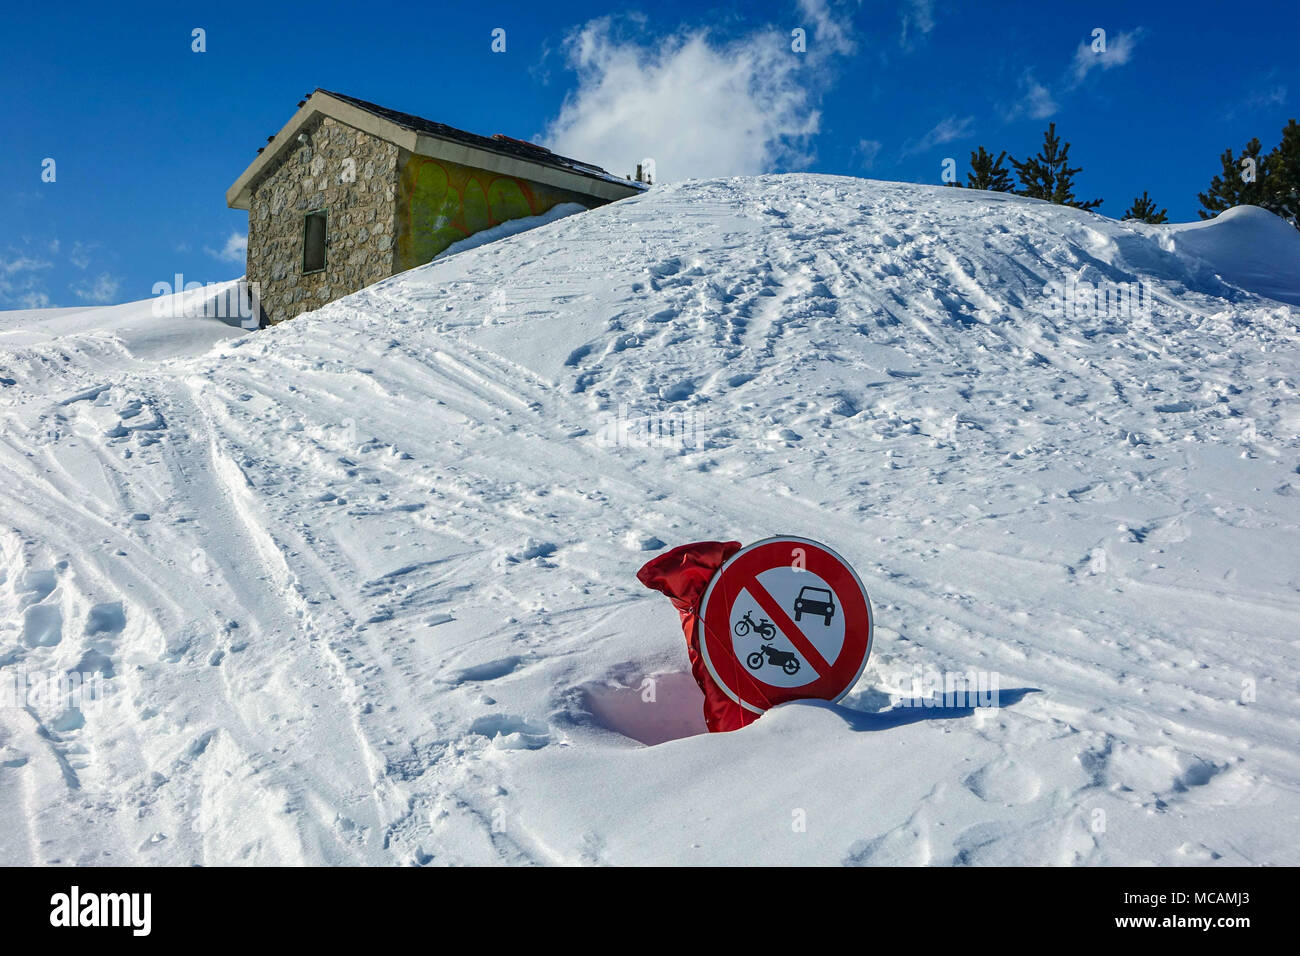 Road signs and snow, Col de Puymorens, winter, France, French Pyrenees  Stock Photo - Alamy